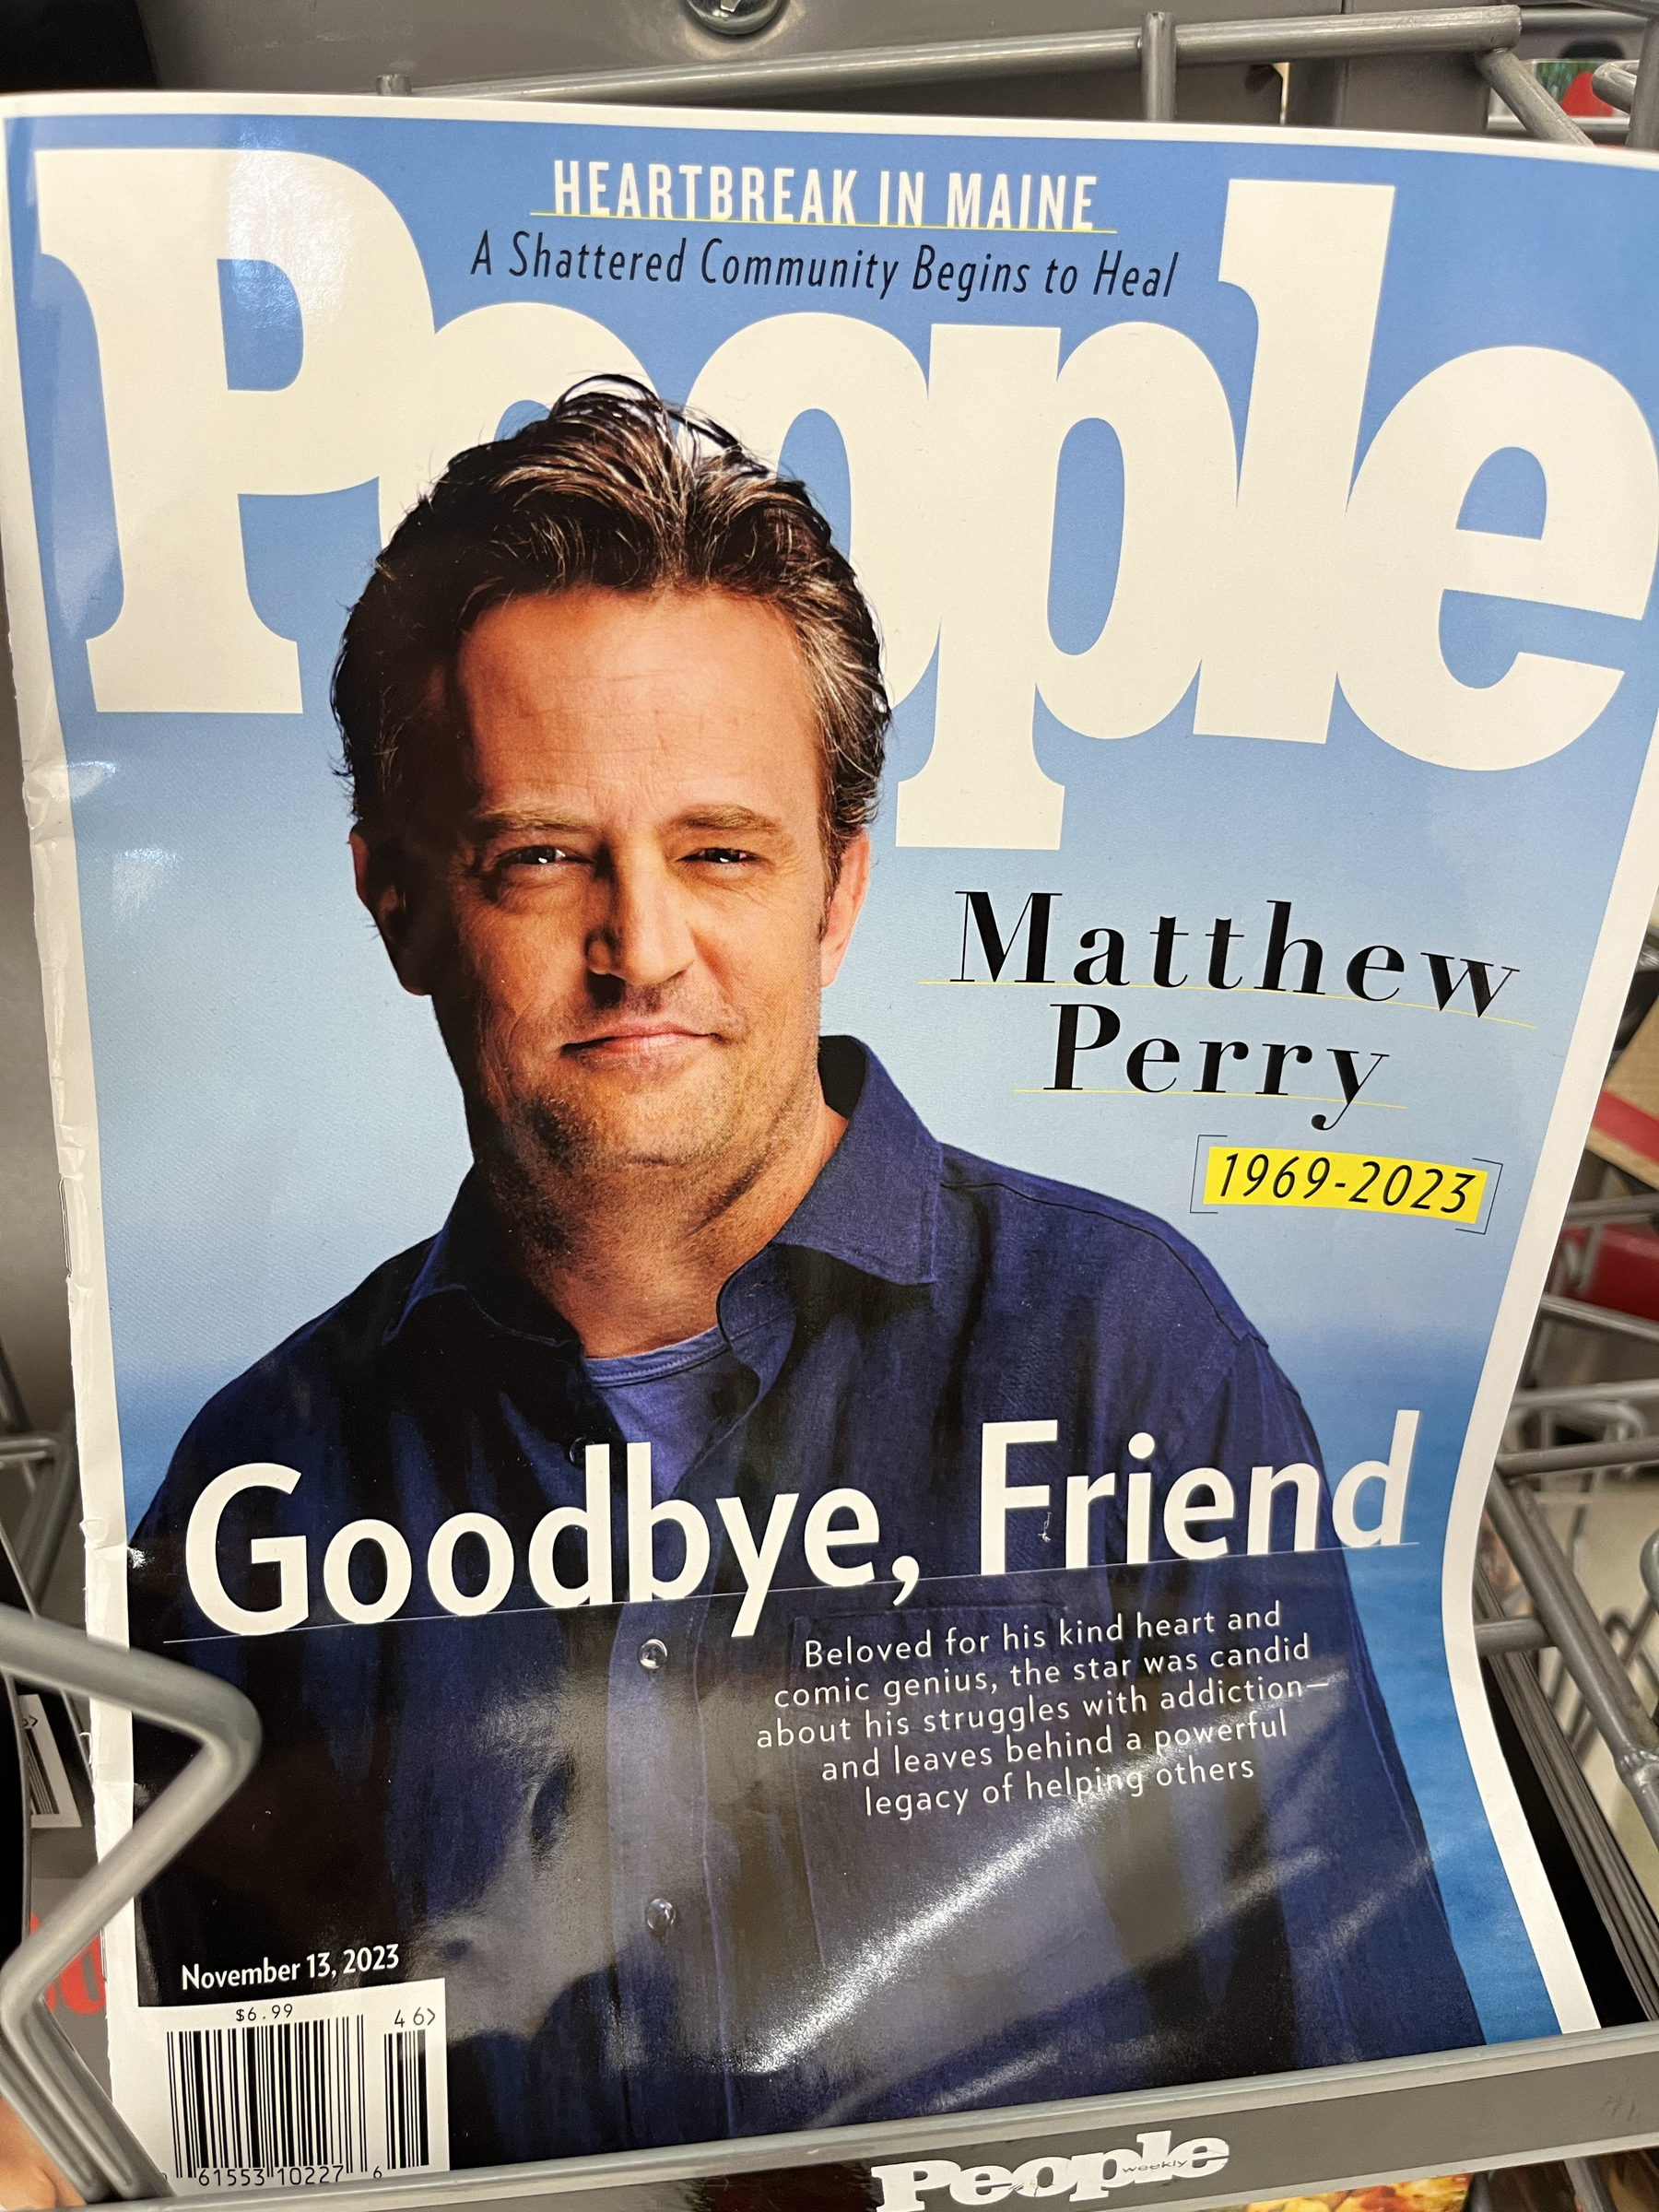 people magazine cover with Matthew Perry remembrance and the tagline “goodbye, friend”